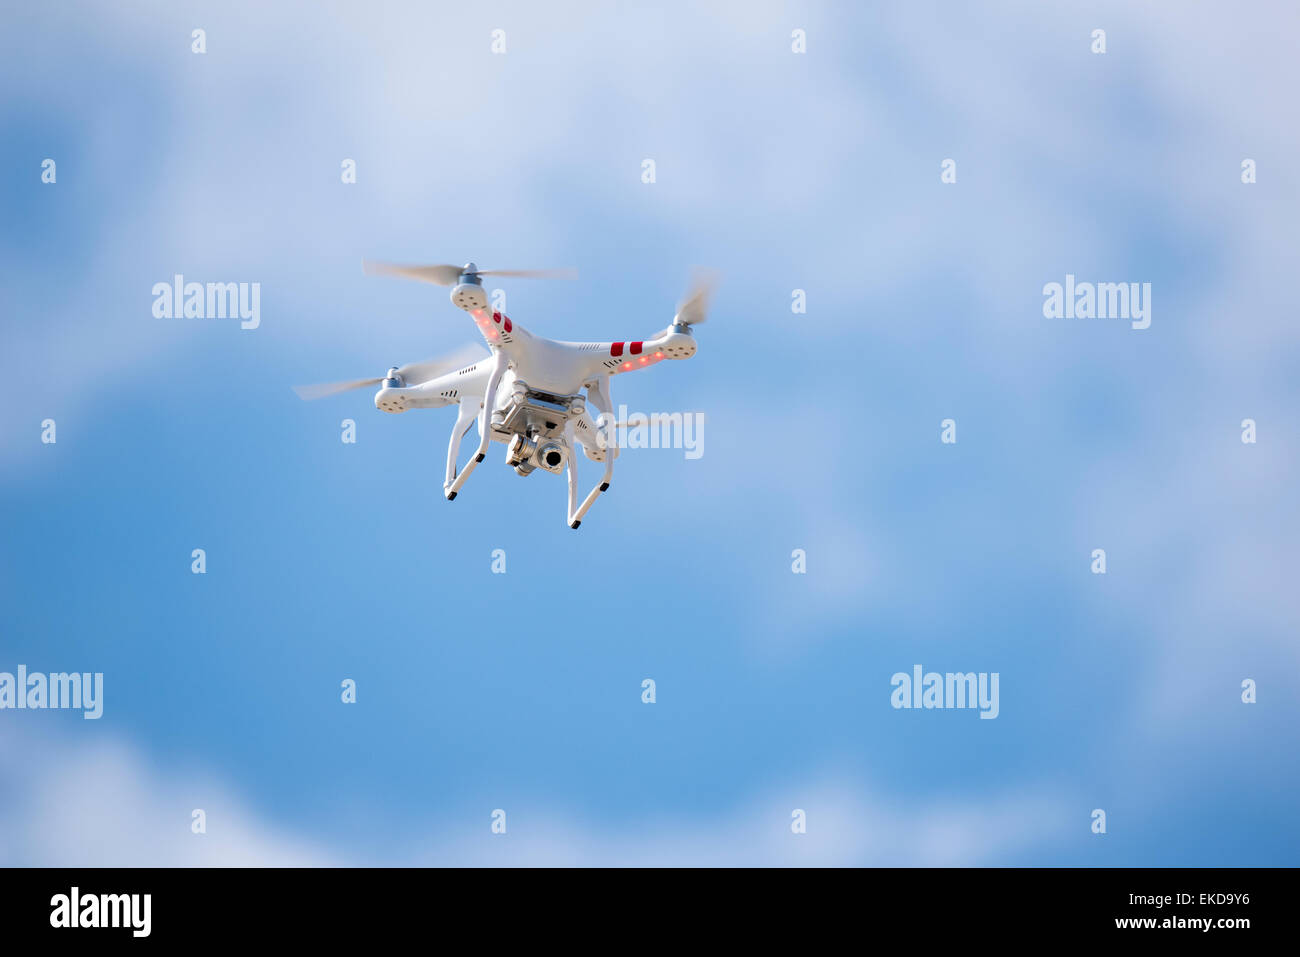 An unpleasant surprise when on a cliff top- a flying drone! Stock Photo